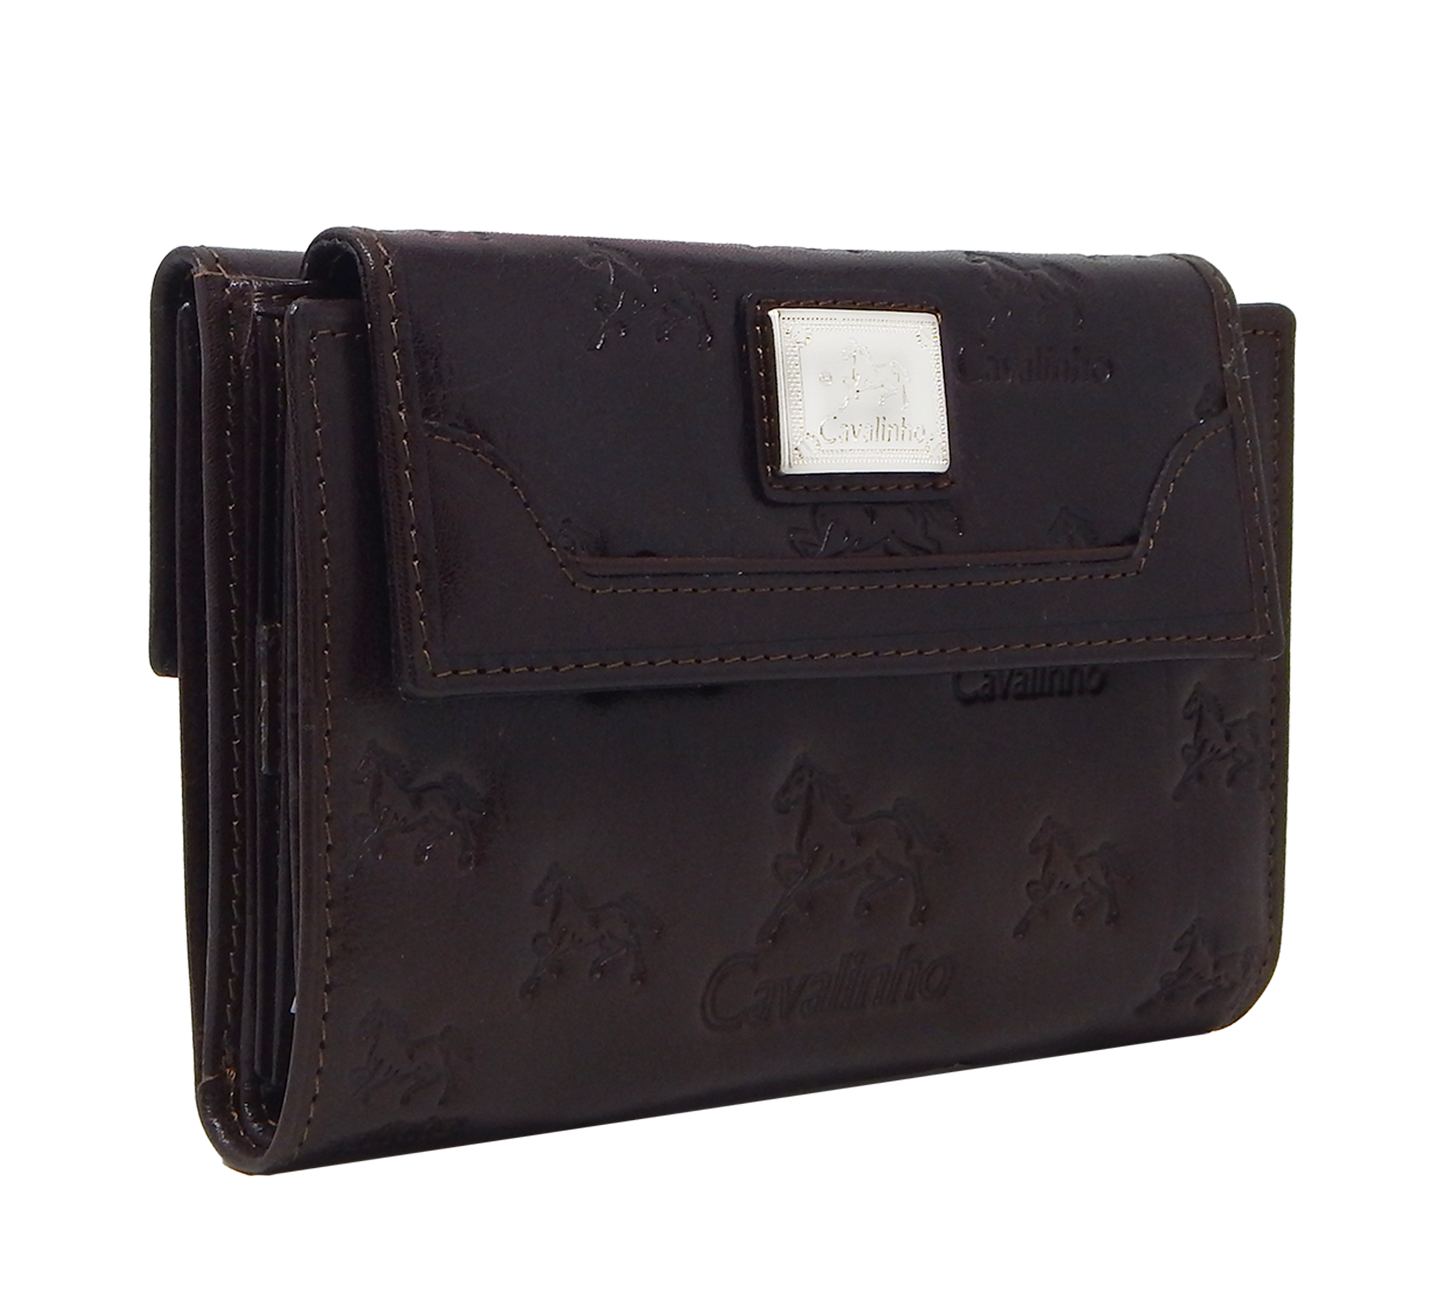 #color_ Brown | Cavalinho Cavalo Lusitano Leather Wallet - Brown - 28090204_02_a_84a5630c-8c33-491a-9eb4-e2564fdeef0b